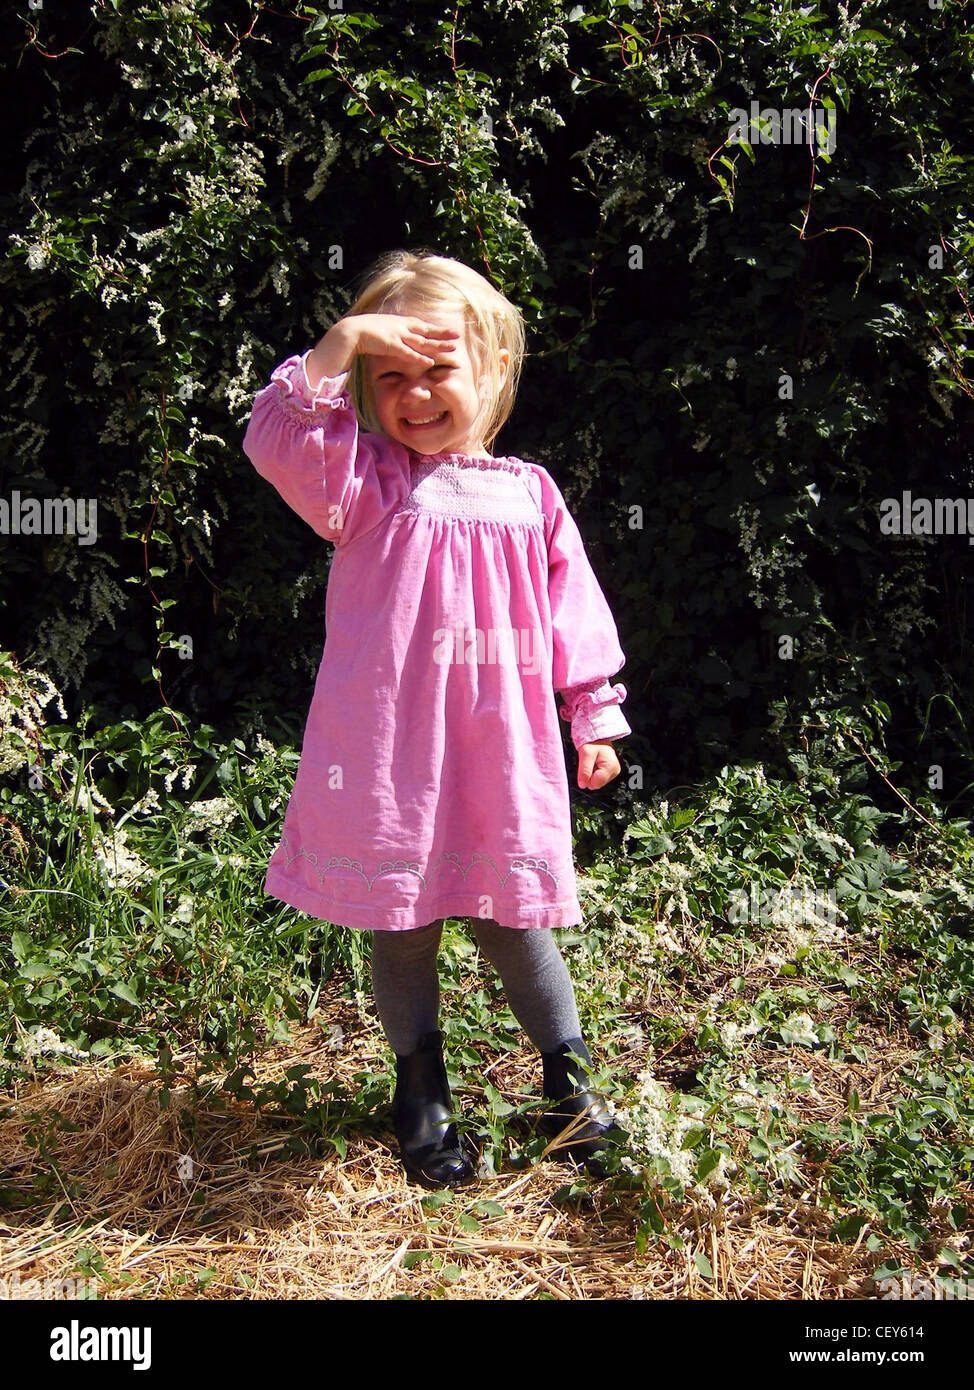 https://c8.alamy.com/comp/CEY614/a-young-blonde-female-wearing-a-pink-smocked-dress-grey-tights-and-CEY614.jpg